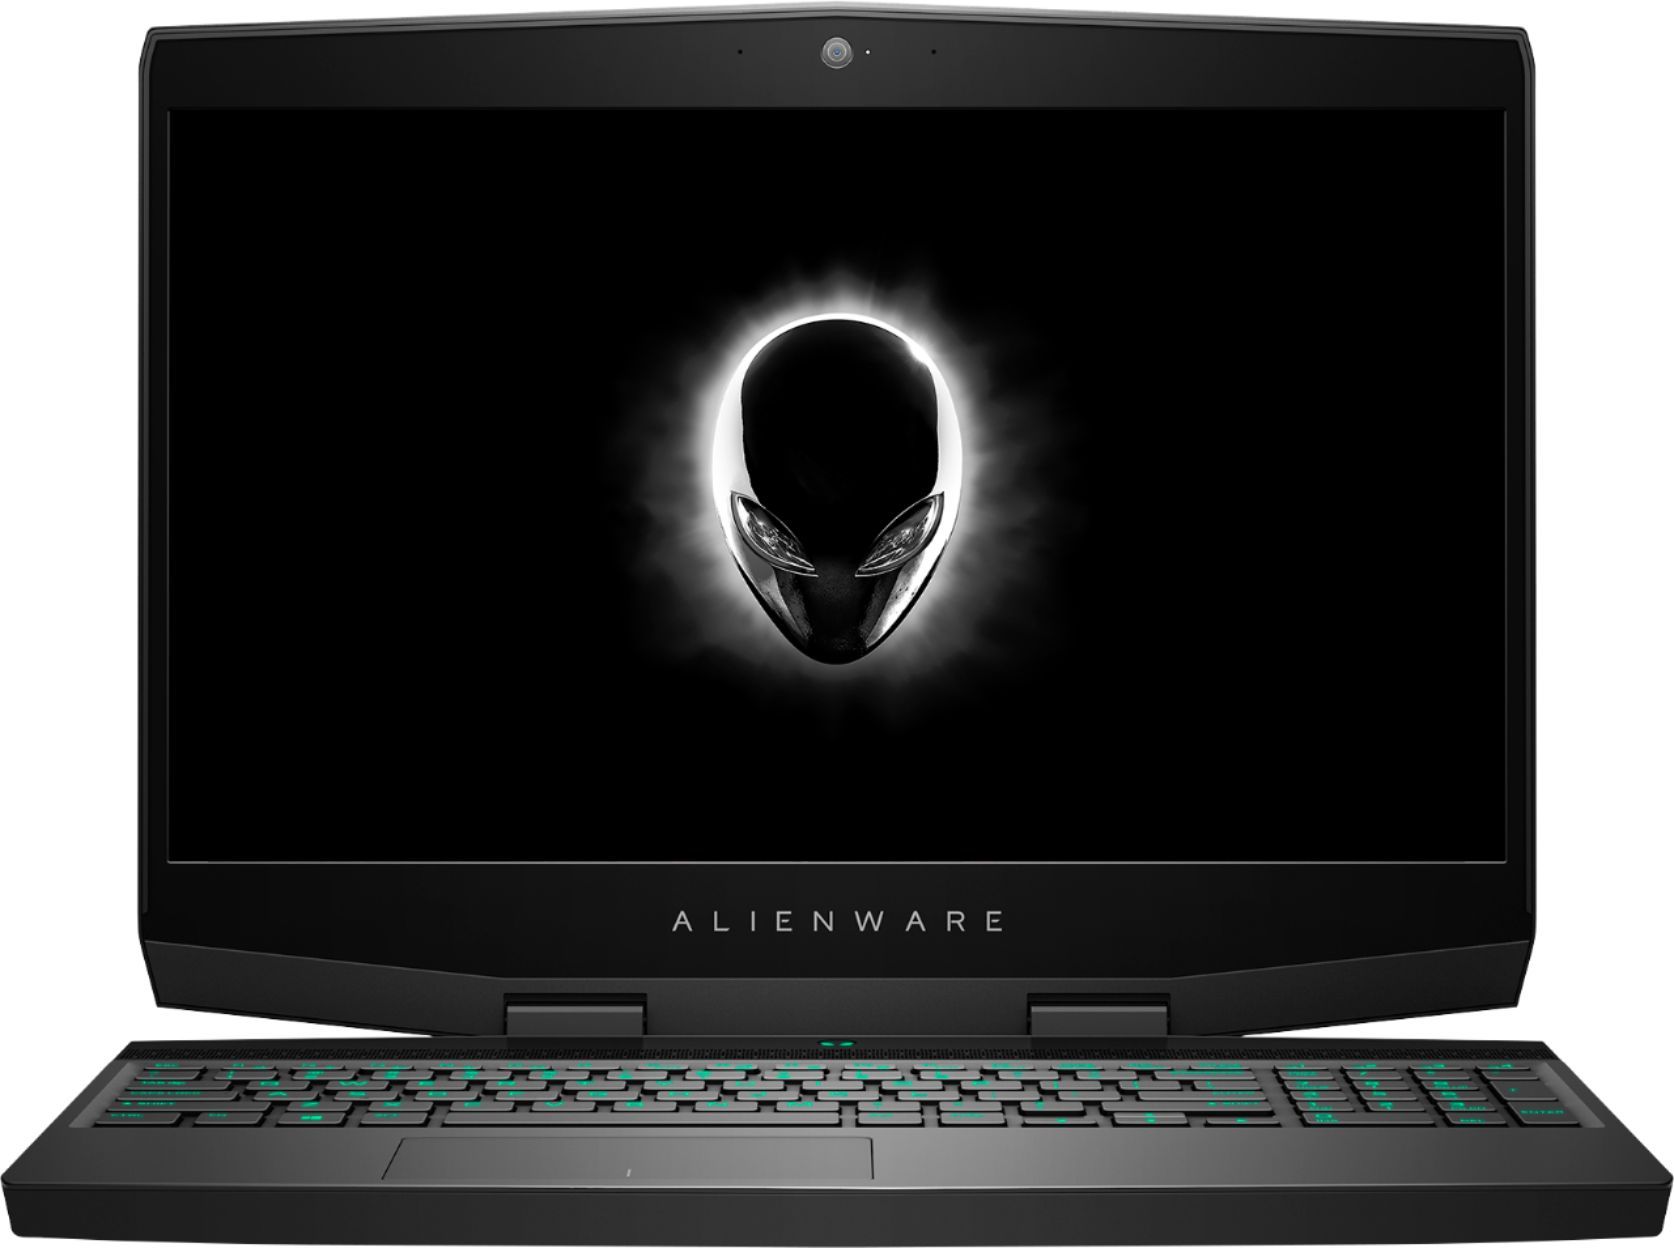 Best Buy: Alienware 15.6" Gaming Laptop Intel Core 16GB Memory GeForce GTX 1060 1TB Hybrid Drive + 128GB Solid State Drive Silver AWM15-7830SLV-PUS